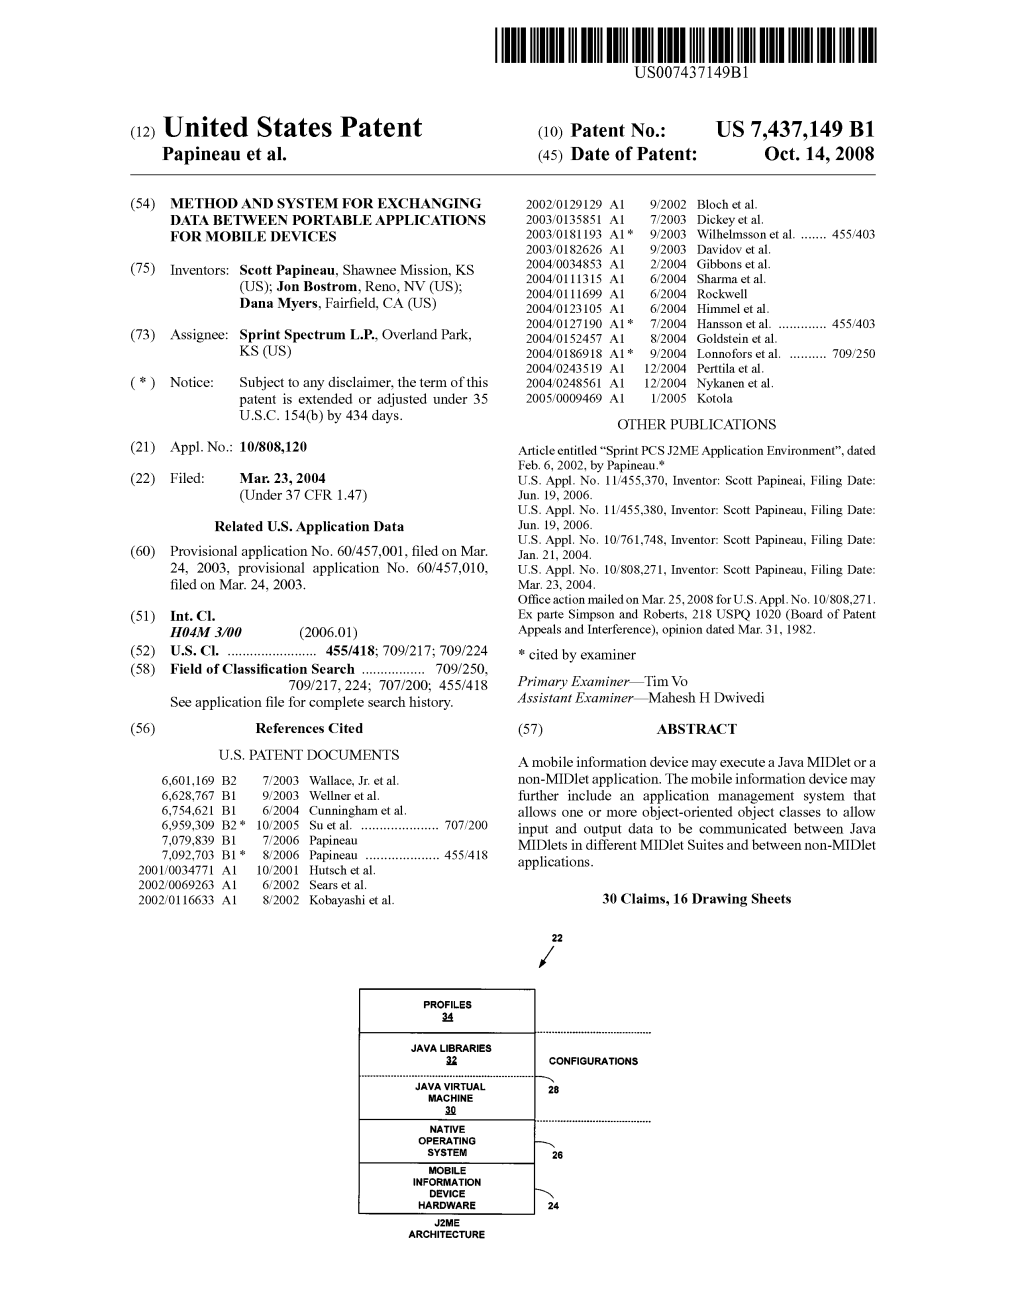 (12) Ulllted States Patent (10) Patent N0.: US 7,437,149 B1 Papineau Et A]